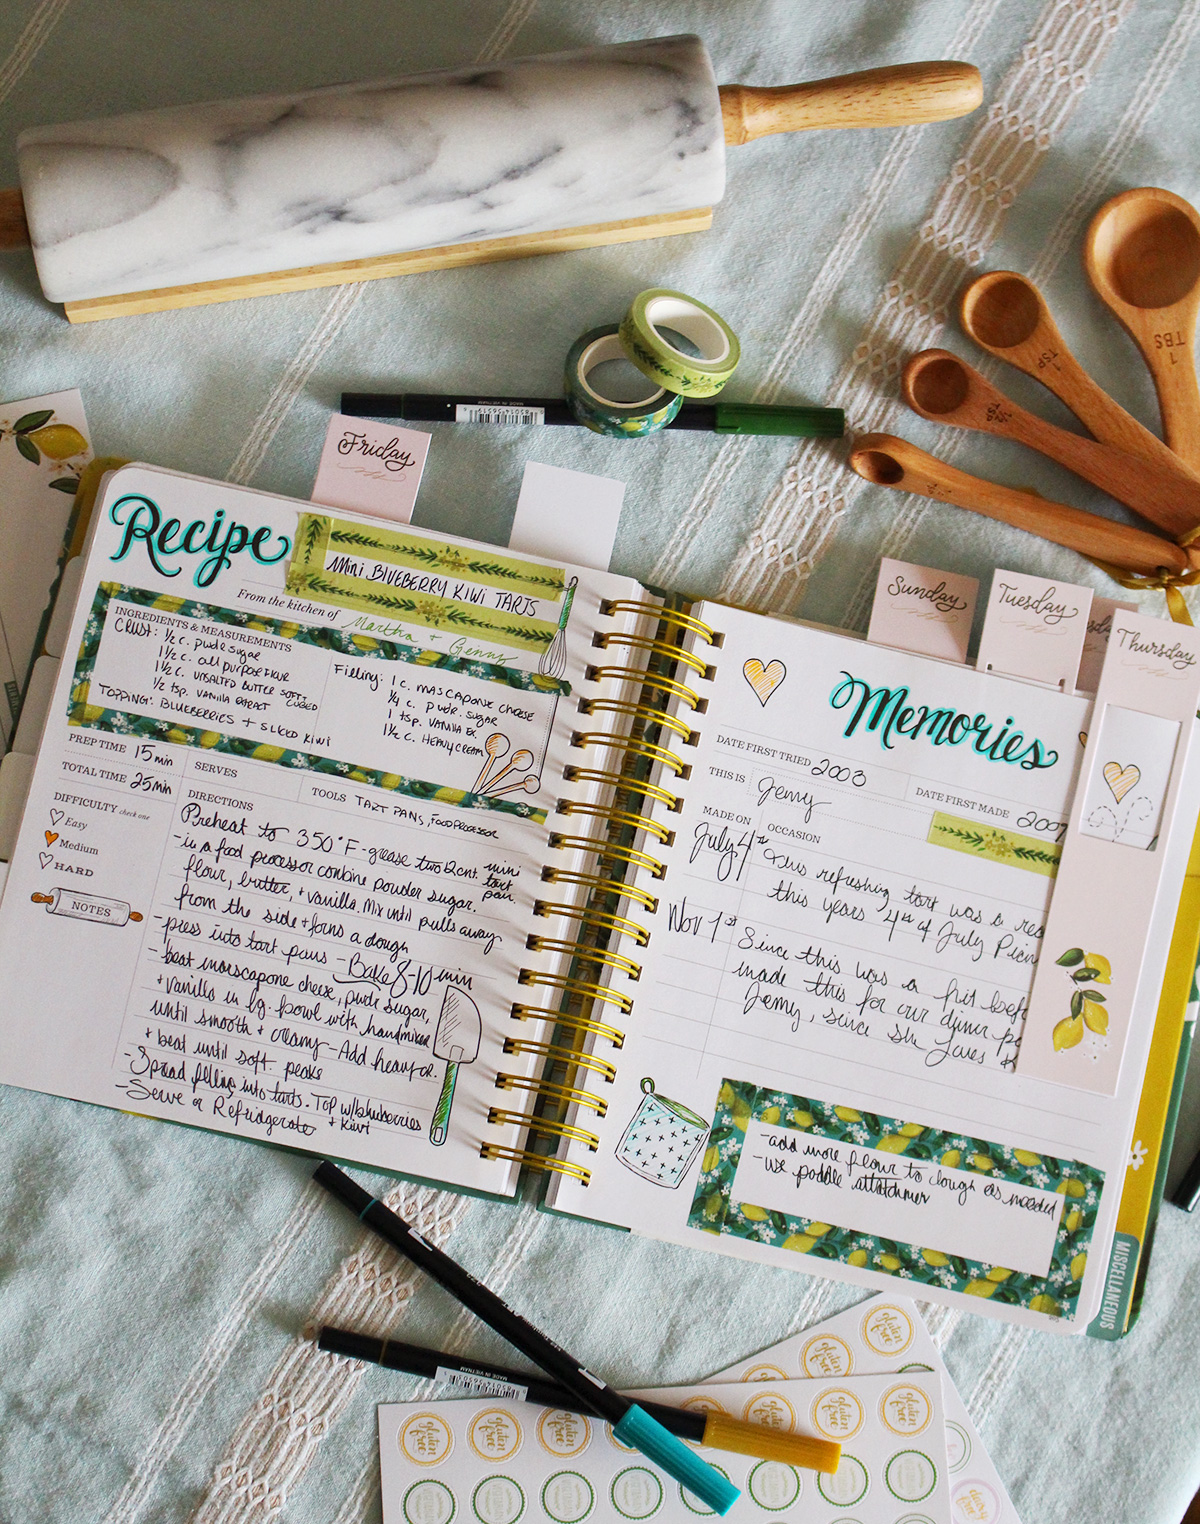 Keepsake Kitchen Diary Crafting Supplies now available